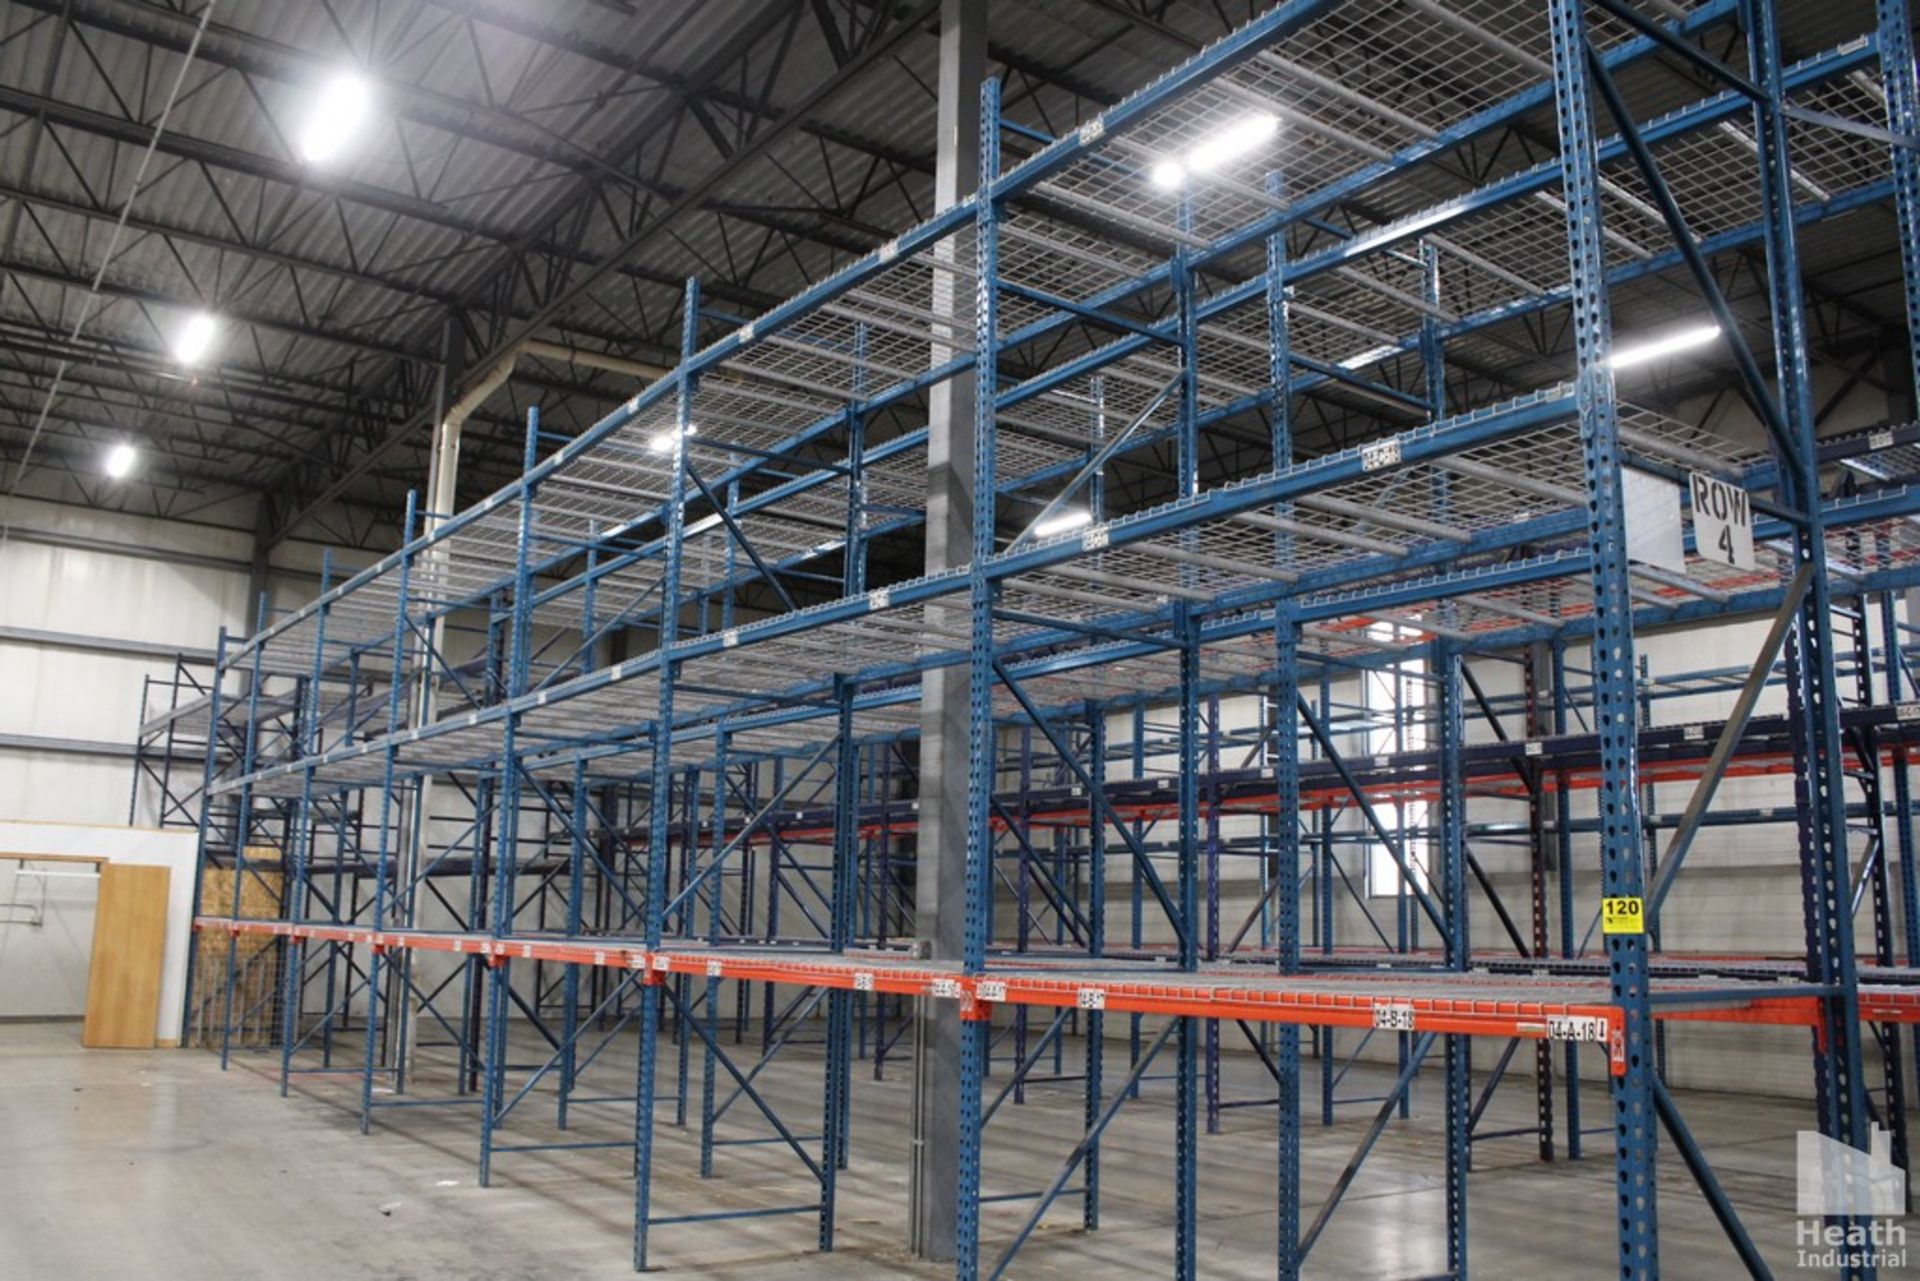 (7) SECTIONS OF TEAR DROP STYLE PALLET RACK, WITH WIRE DECKING, 8' X 42" X 16' HIGH